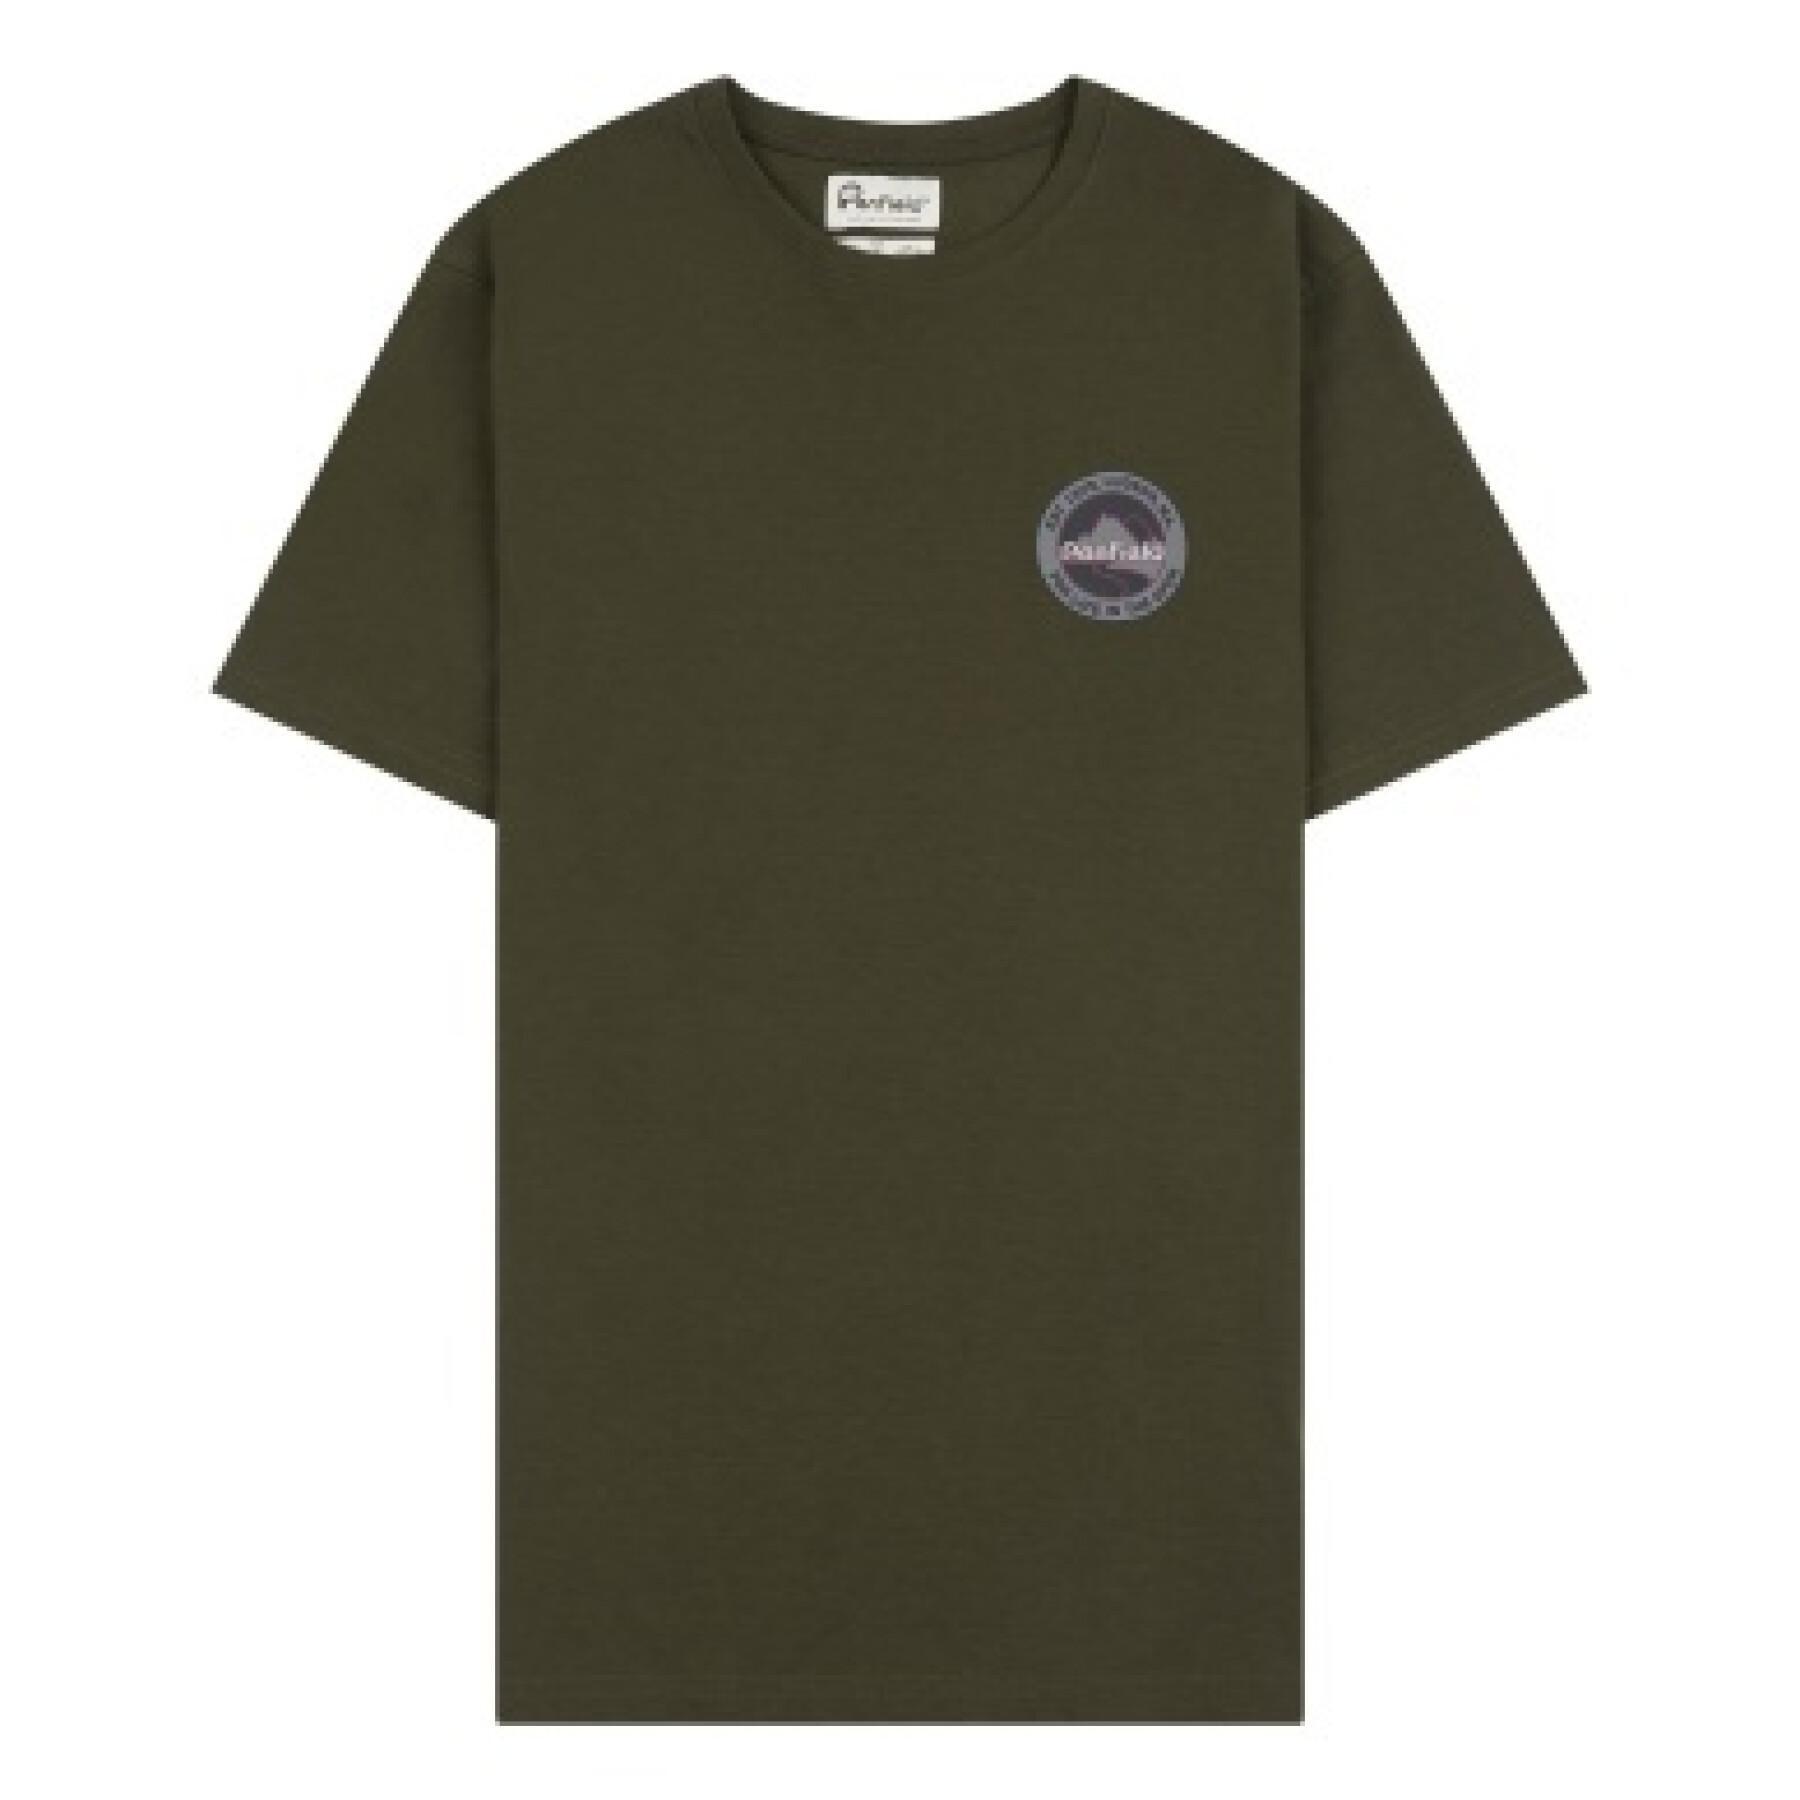 Long sleeve T-shirt Penfield back graphic